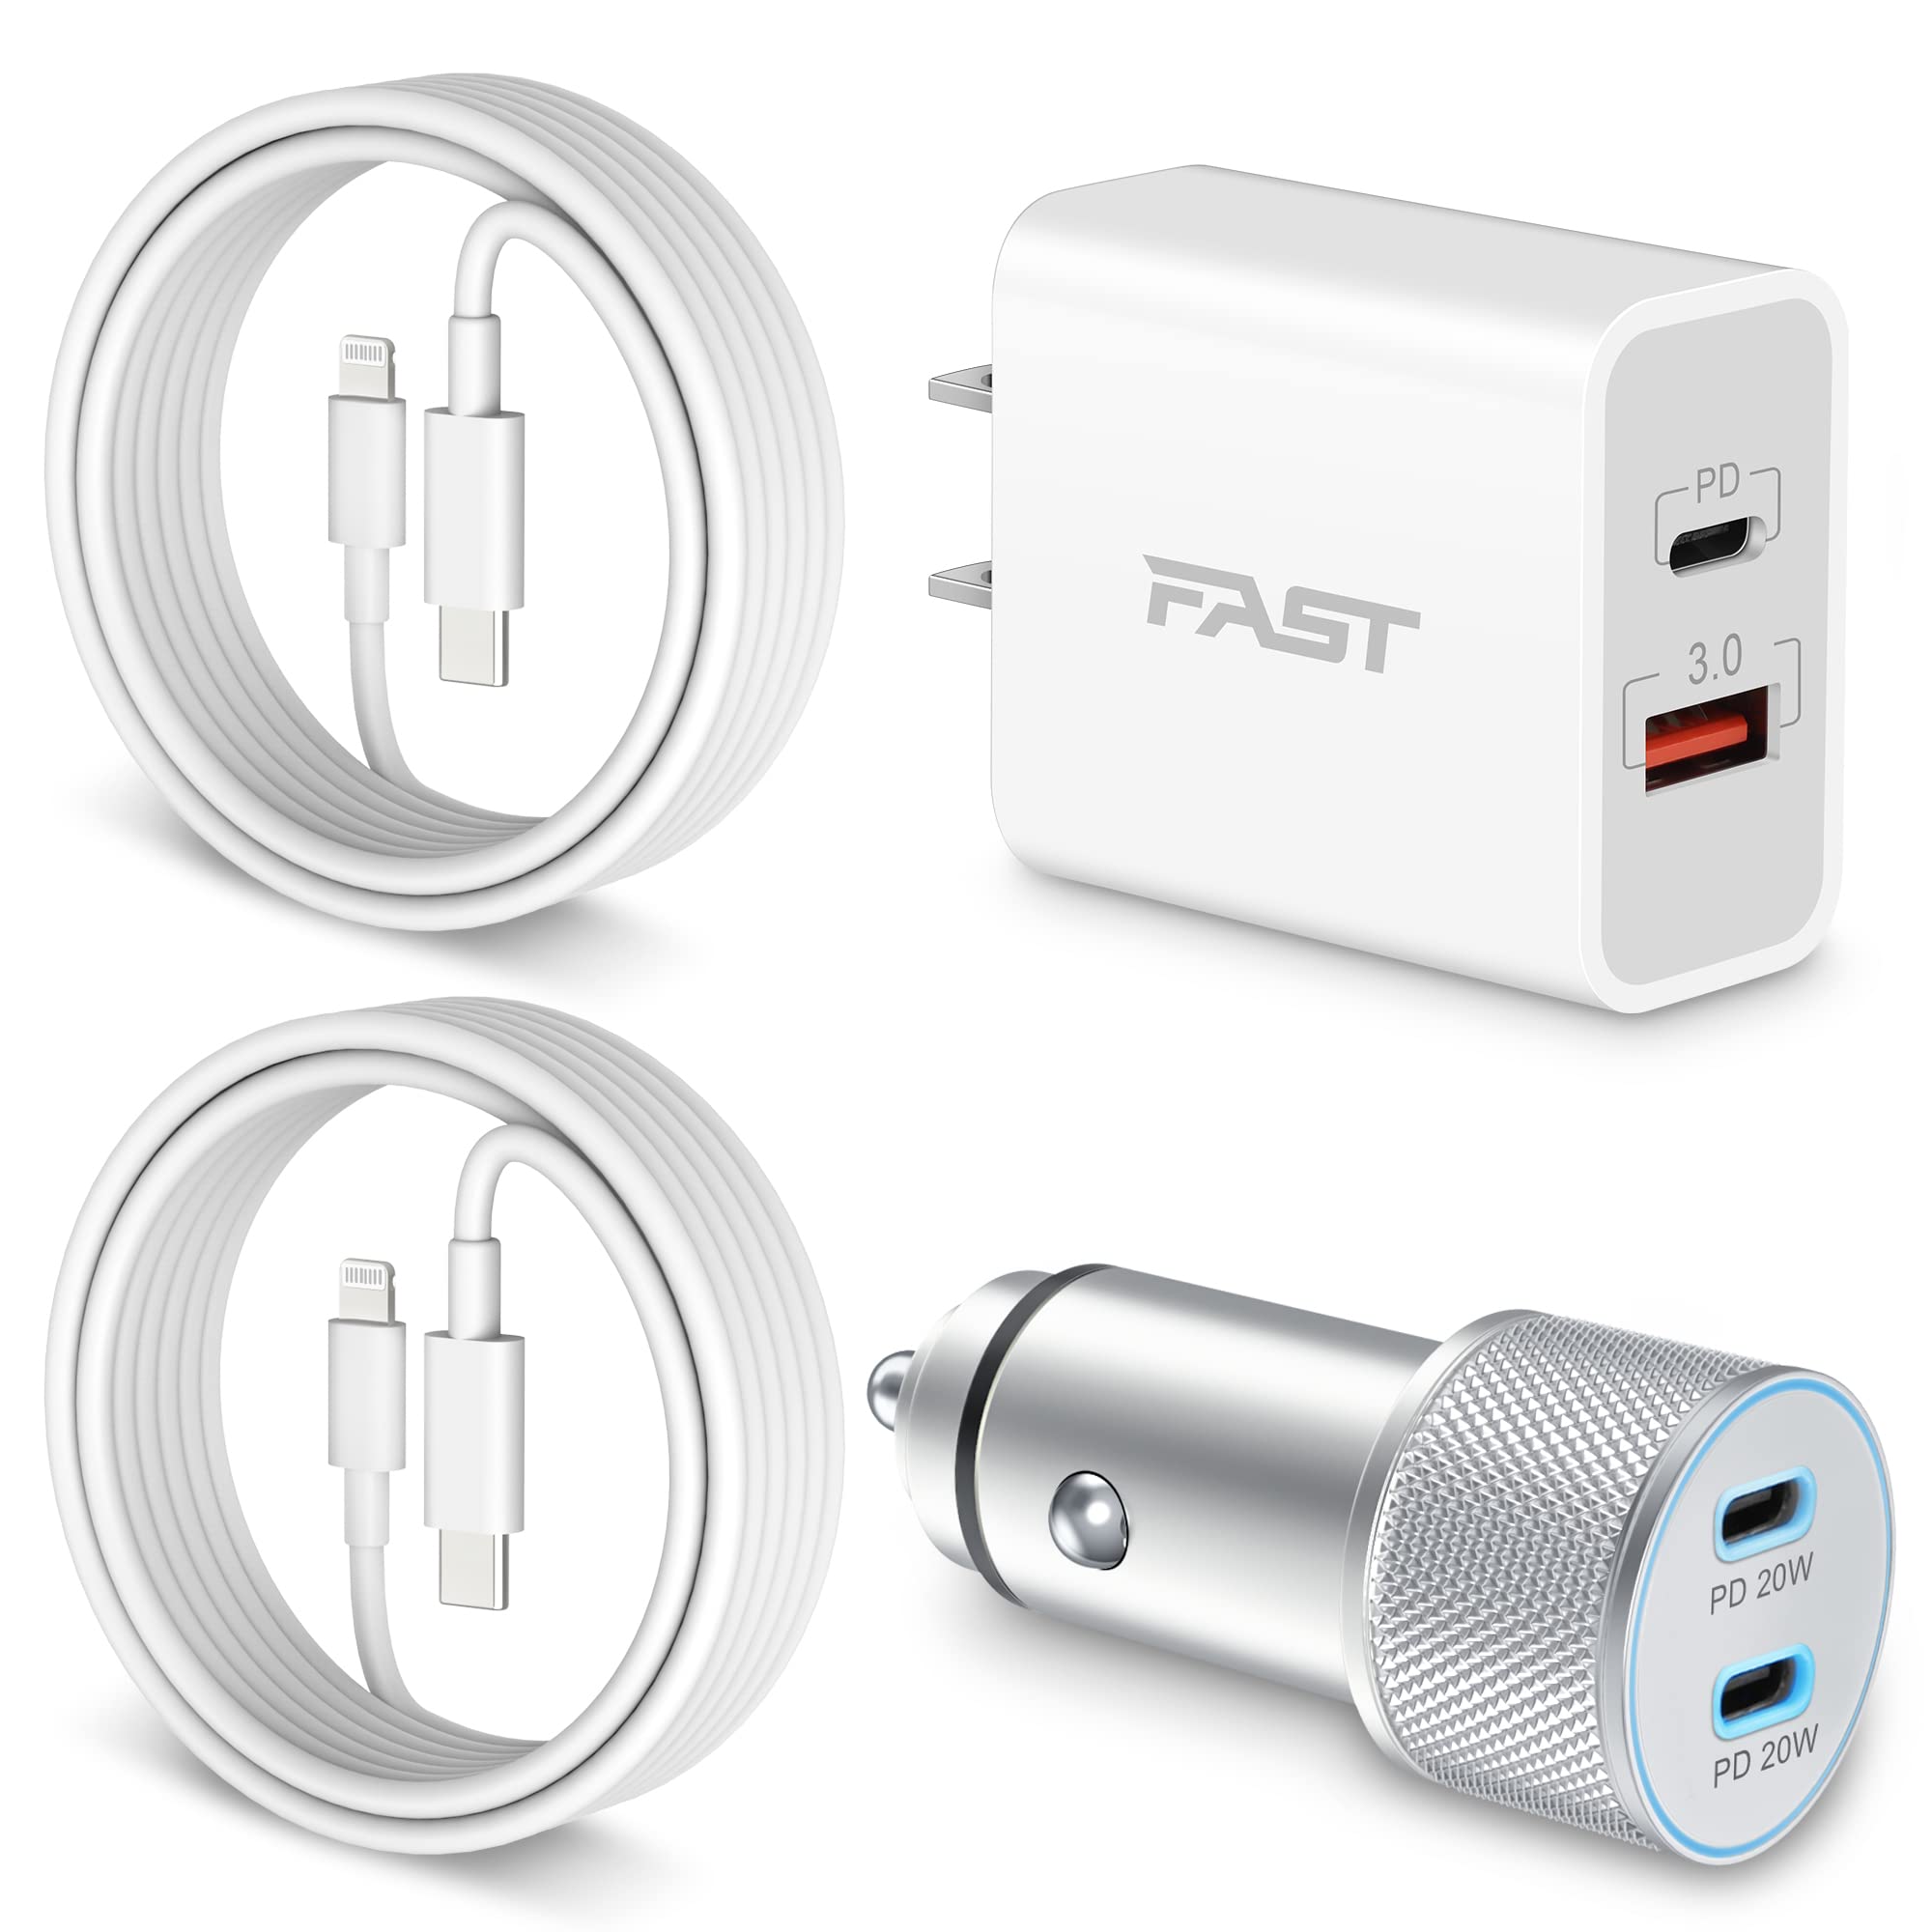 iPhone 14 13 Fast Charger [Apple MFi Certified], LUOSIKE 40W 2Port USB-C Car Charger + 20W USB C Wall Charger Block + 2 X 6FT Lightning Cable Fast Charging for iPhone 14 13 Pro Max Mini 12 11 XS, iPad